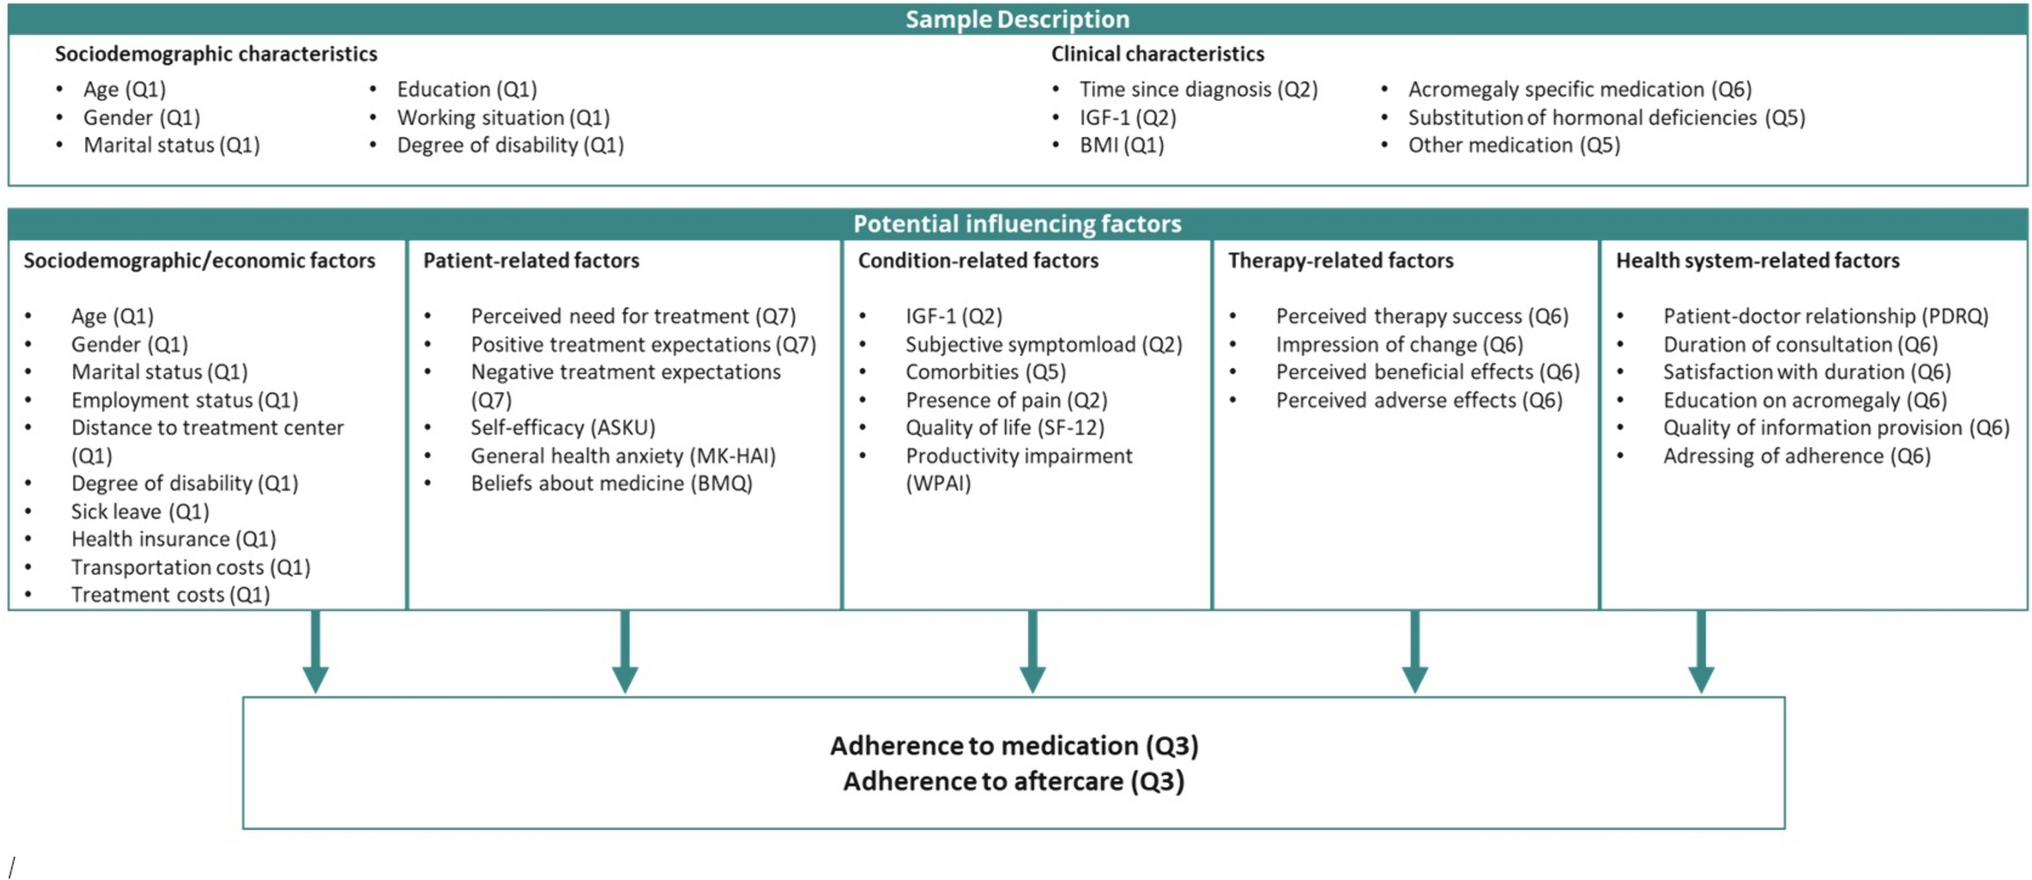 Exploring potential influencing factors of inadherence to specialist aftercare and long-term medication in patients with acromegaly